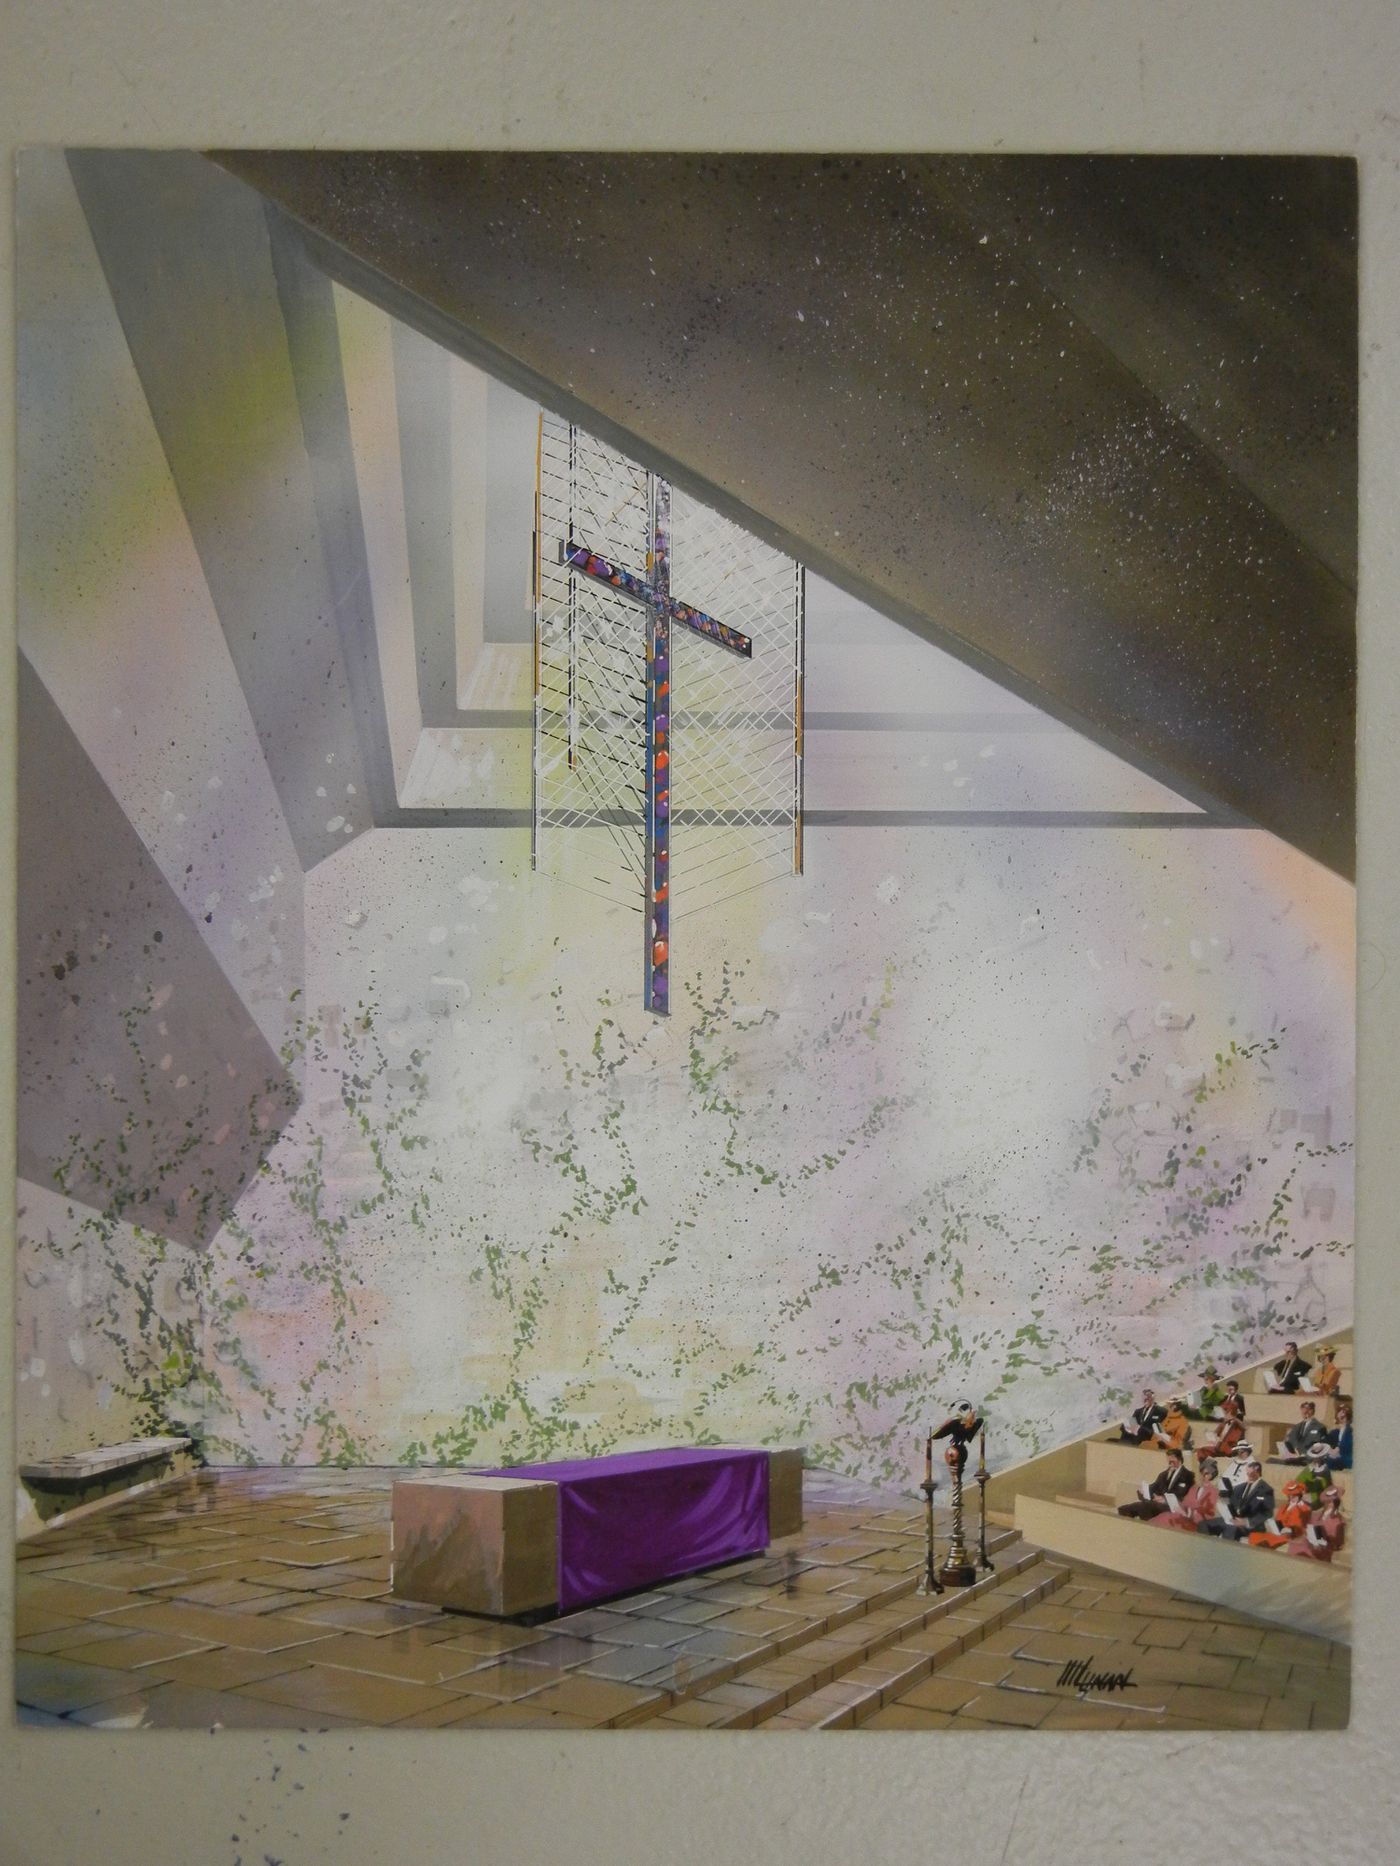 Church Interior perspective showing altar, parishoners, and cross